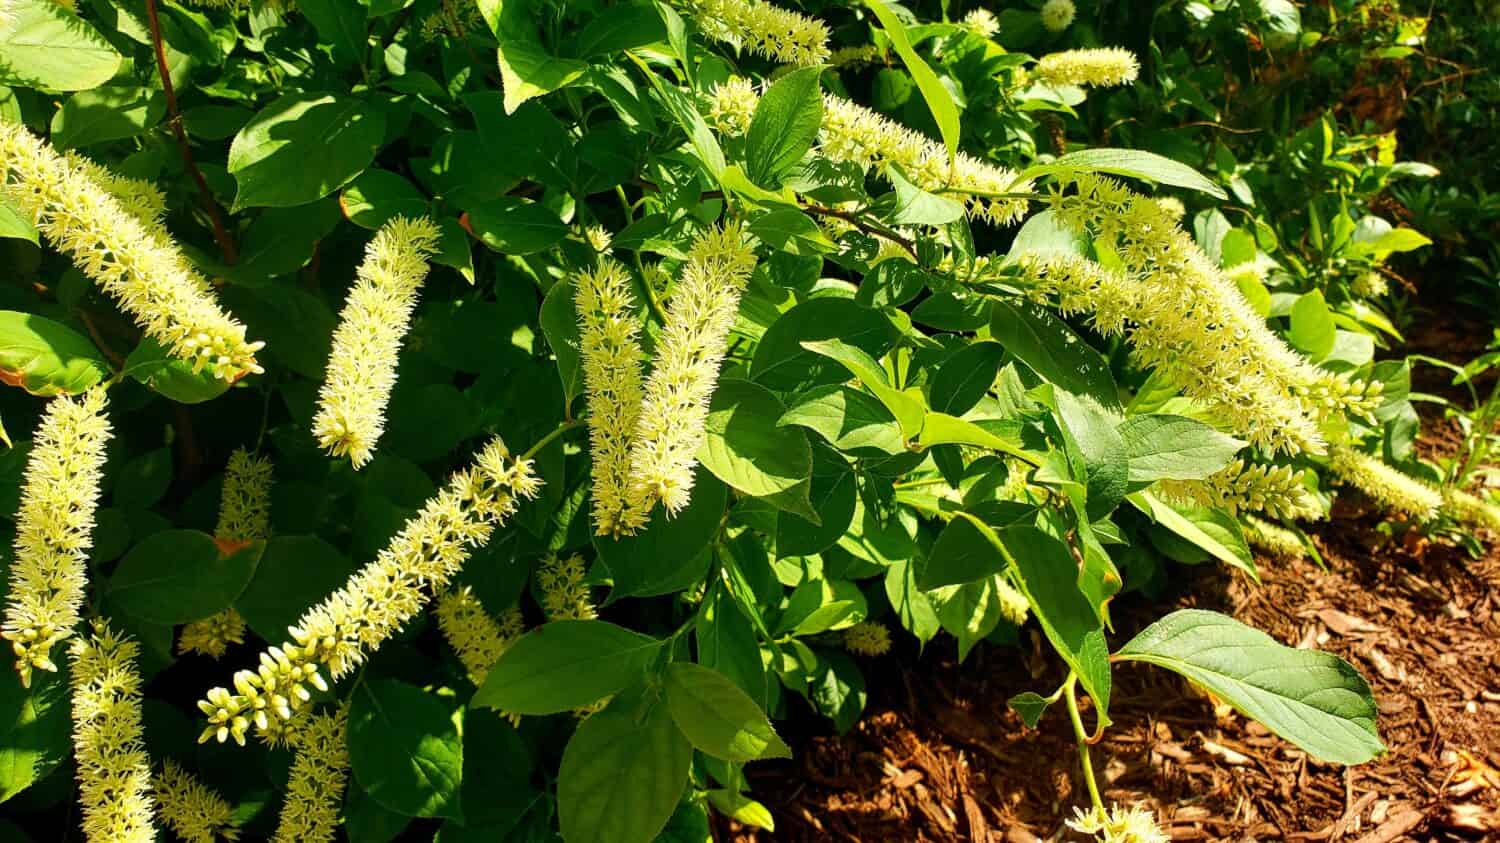 Itea virginica, commonly known as Virginia willow or Virginia sweetspire.